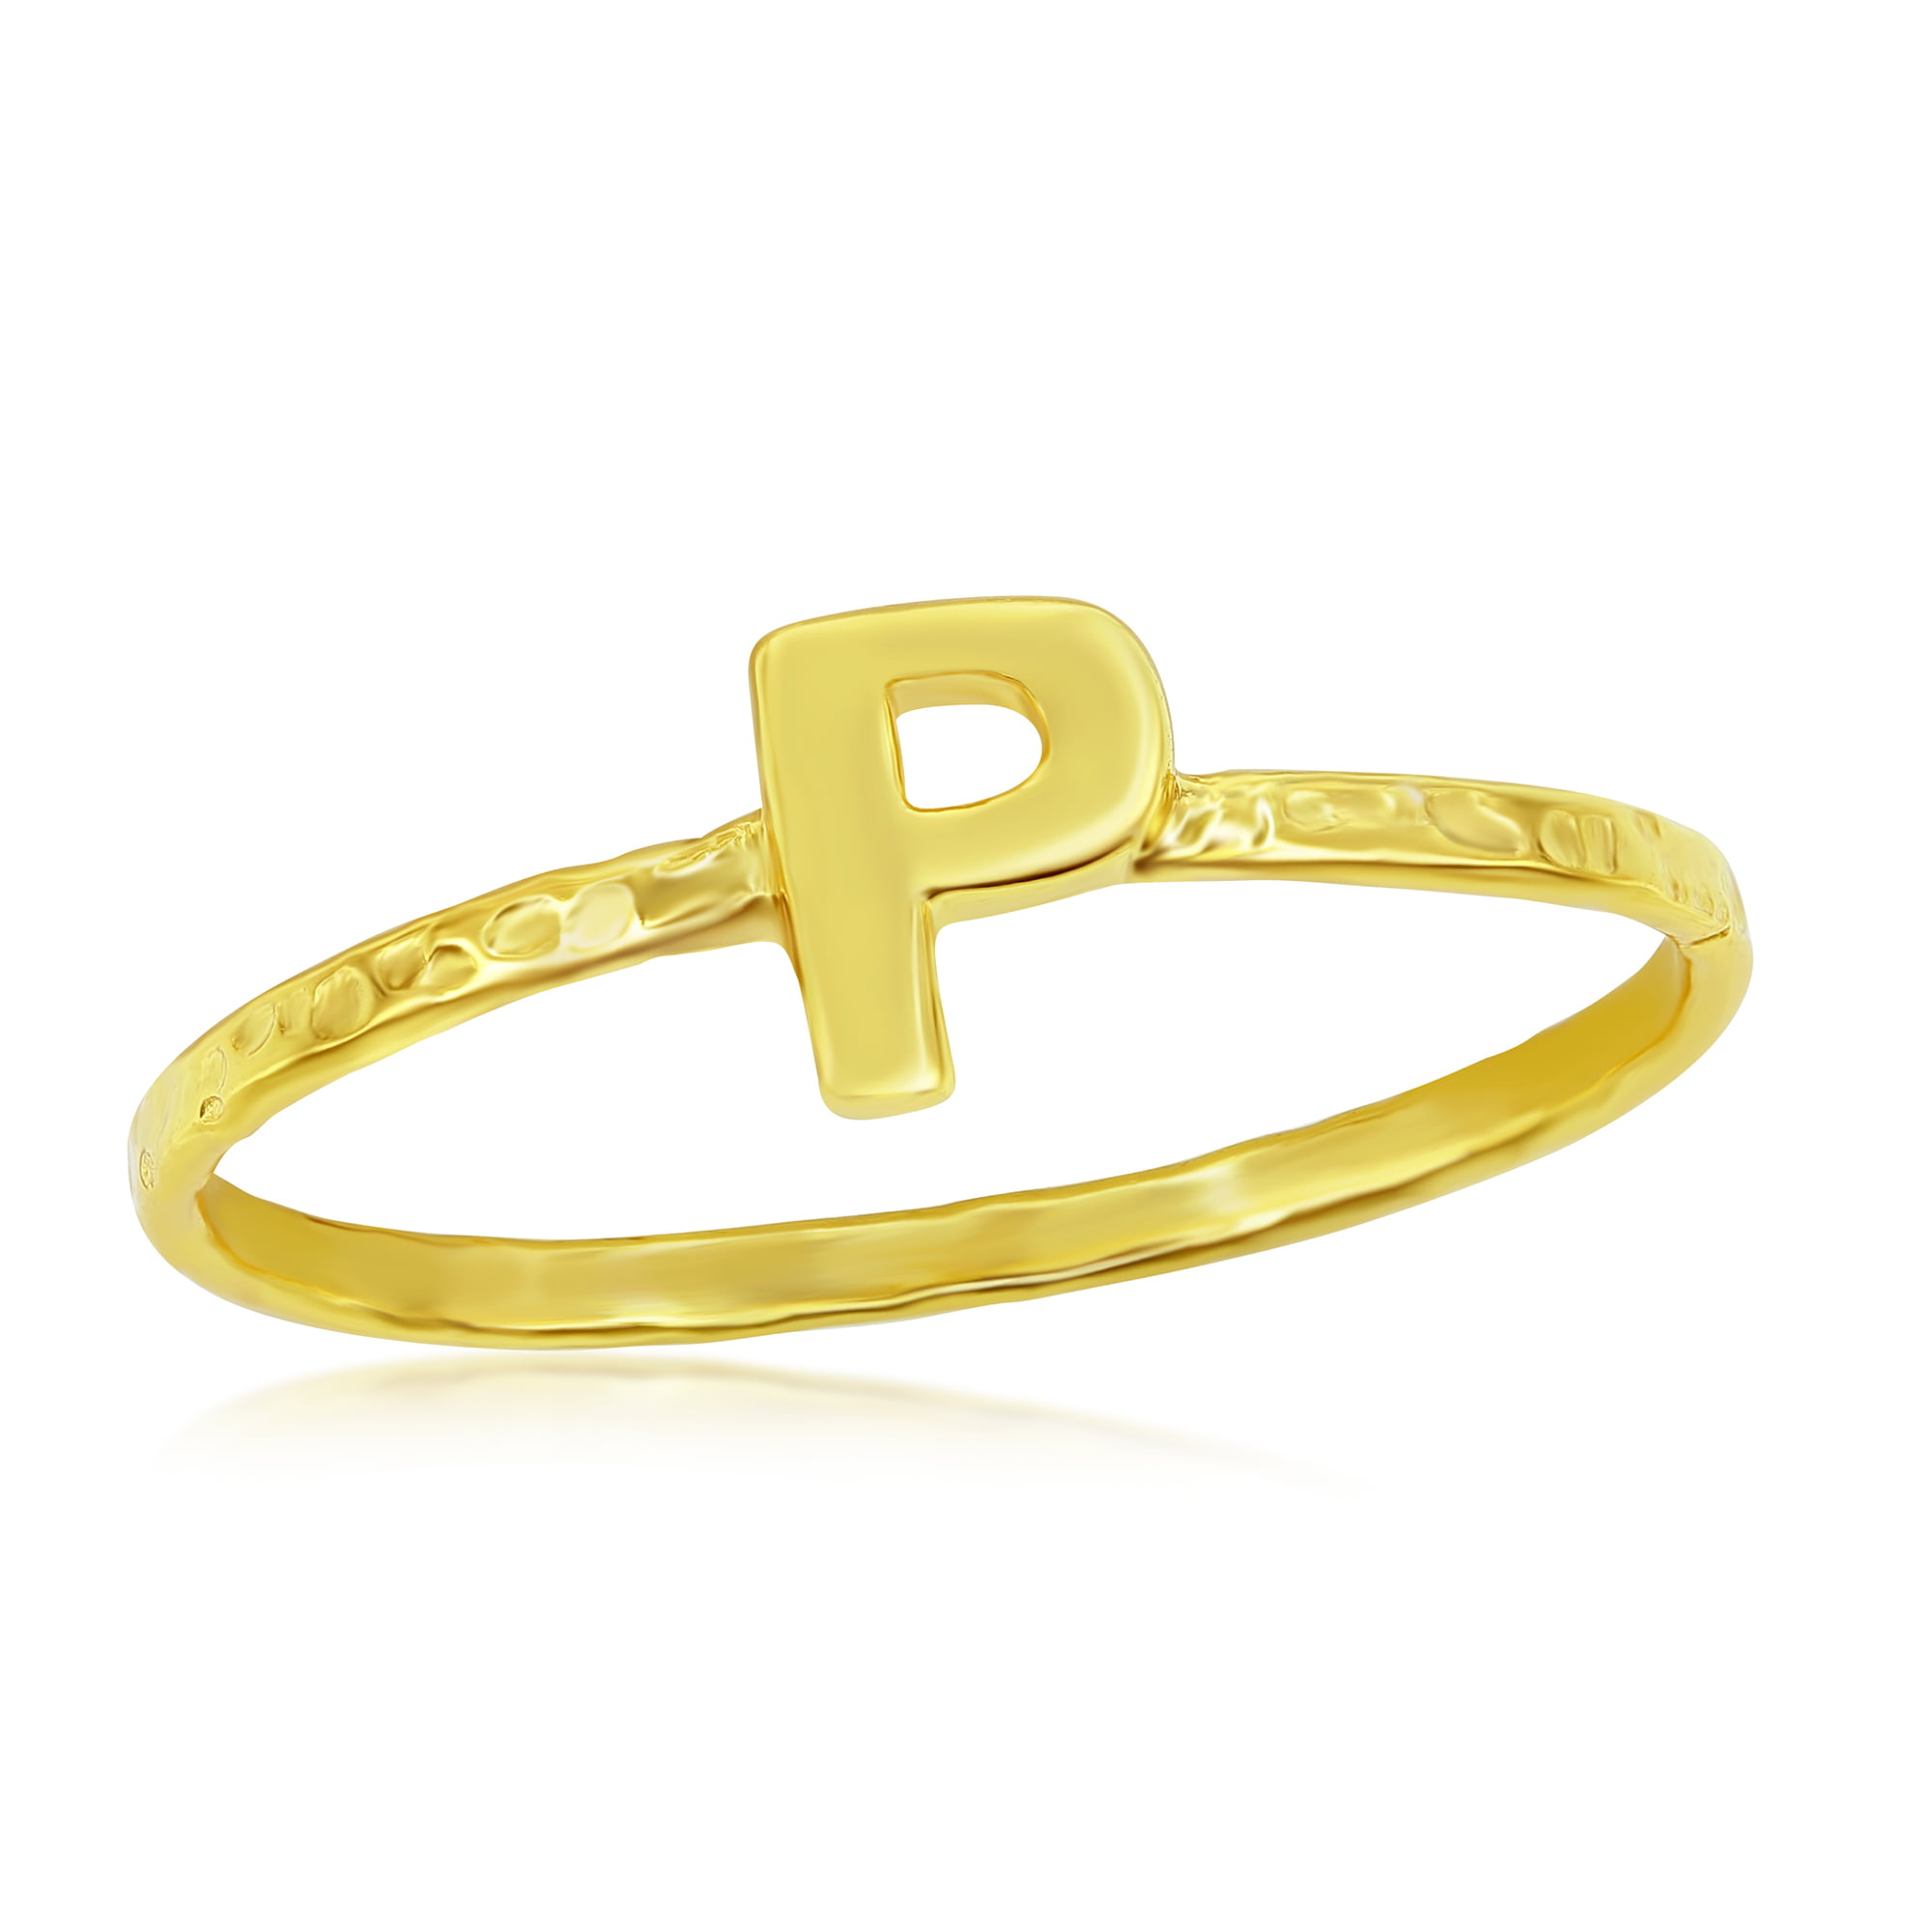 14K, 18K, 22K Real Solid Yellow Gold Round Engraved Initial Letter P Ring,  Hallmark Handmade Unique Signet Ring for Men, Valentine Gift - Etsy Israel